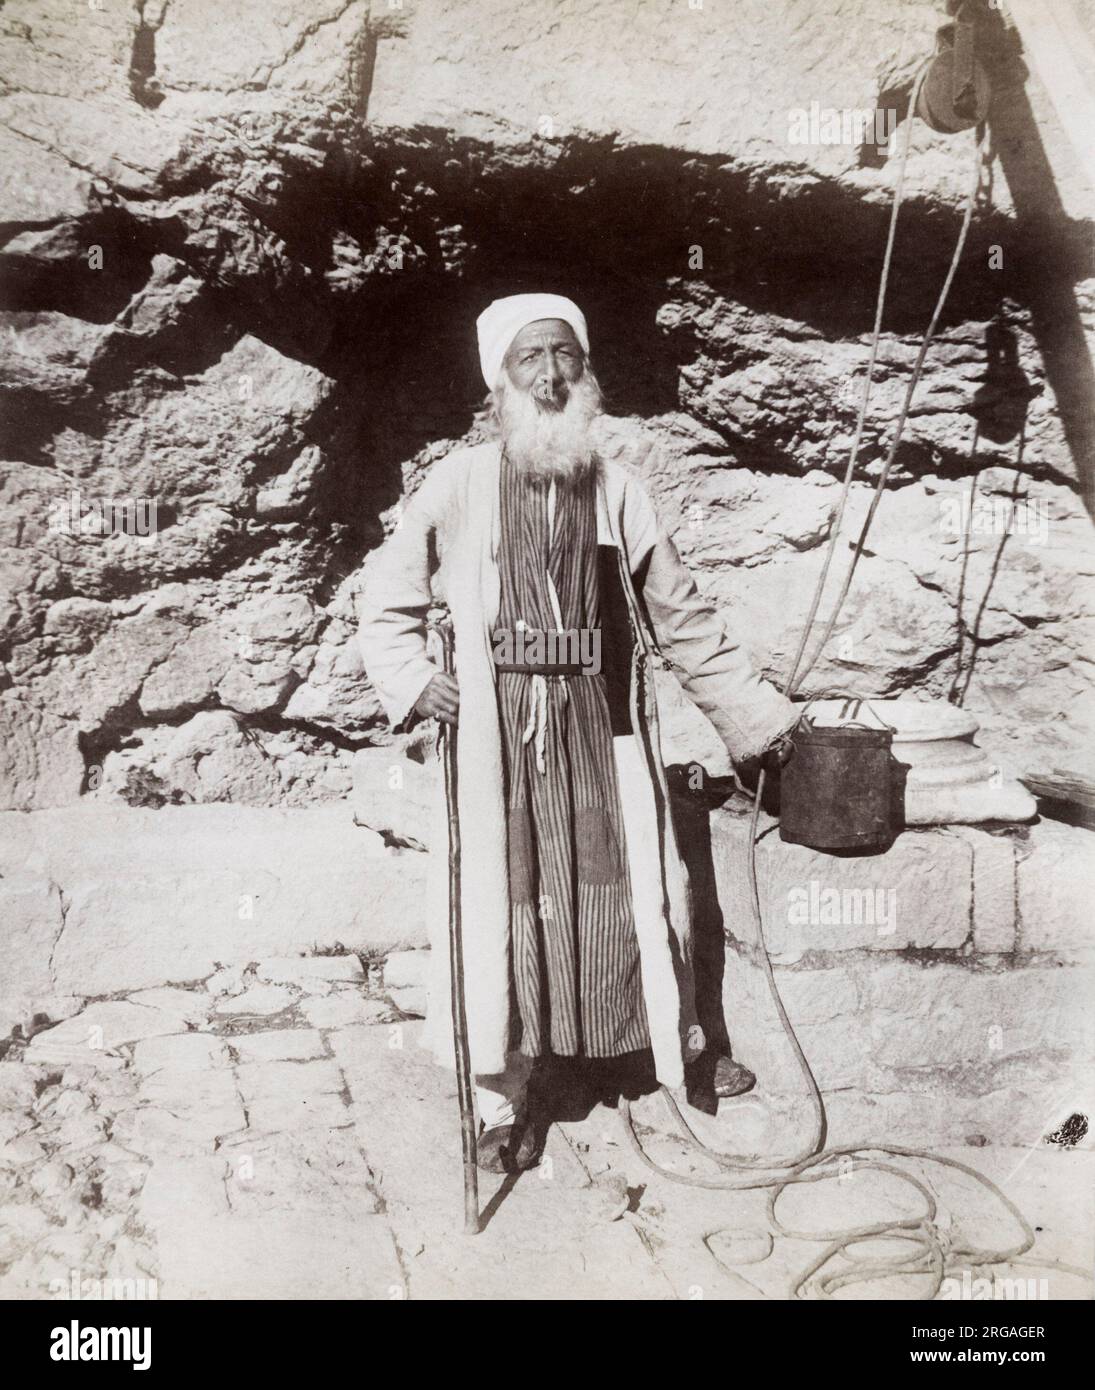 Vintage 19th century photograph - the guardian of the grotto of the prophet, Jeremiah, Jerusalem, Palestine, Holy Land, Israel. Stock Photo